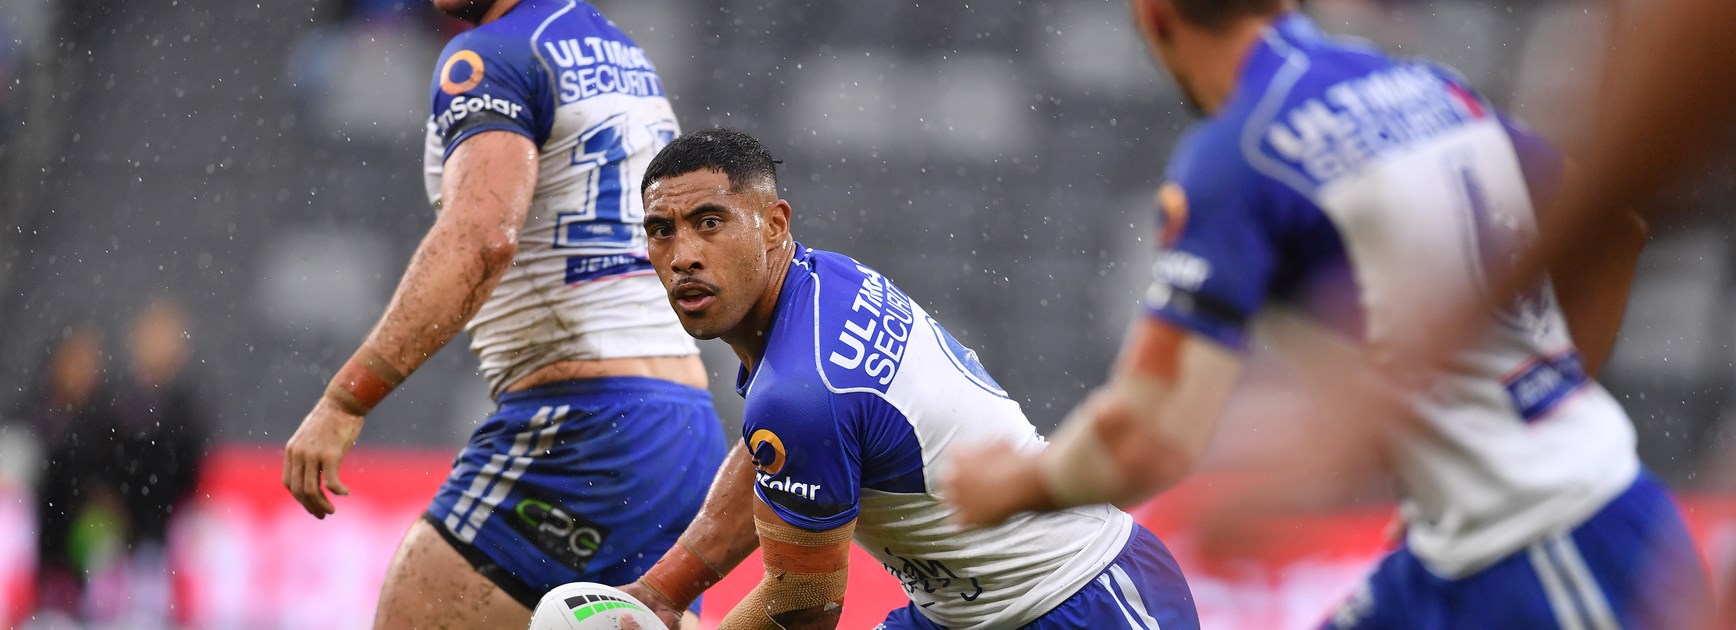 Round 2 snapshot: Morris wings it to top of Dally M leaderboard